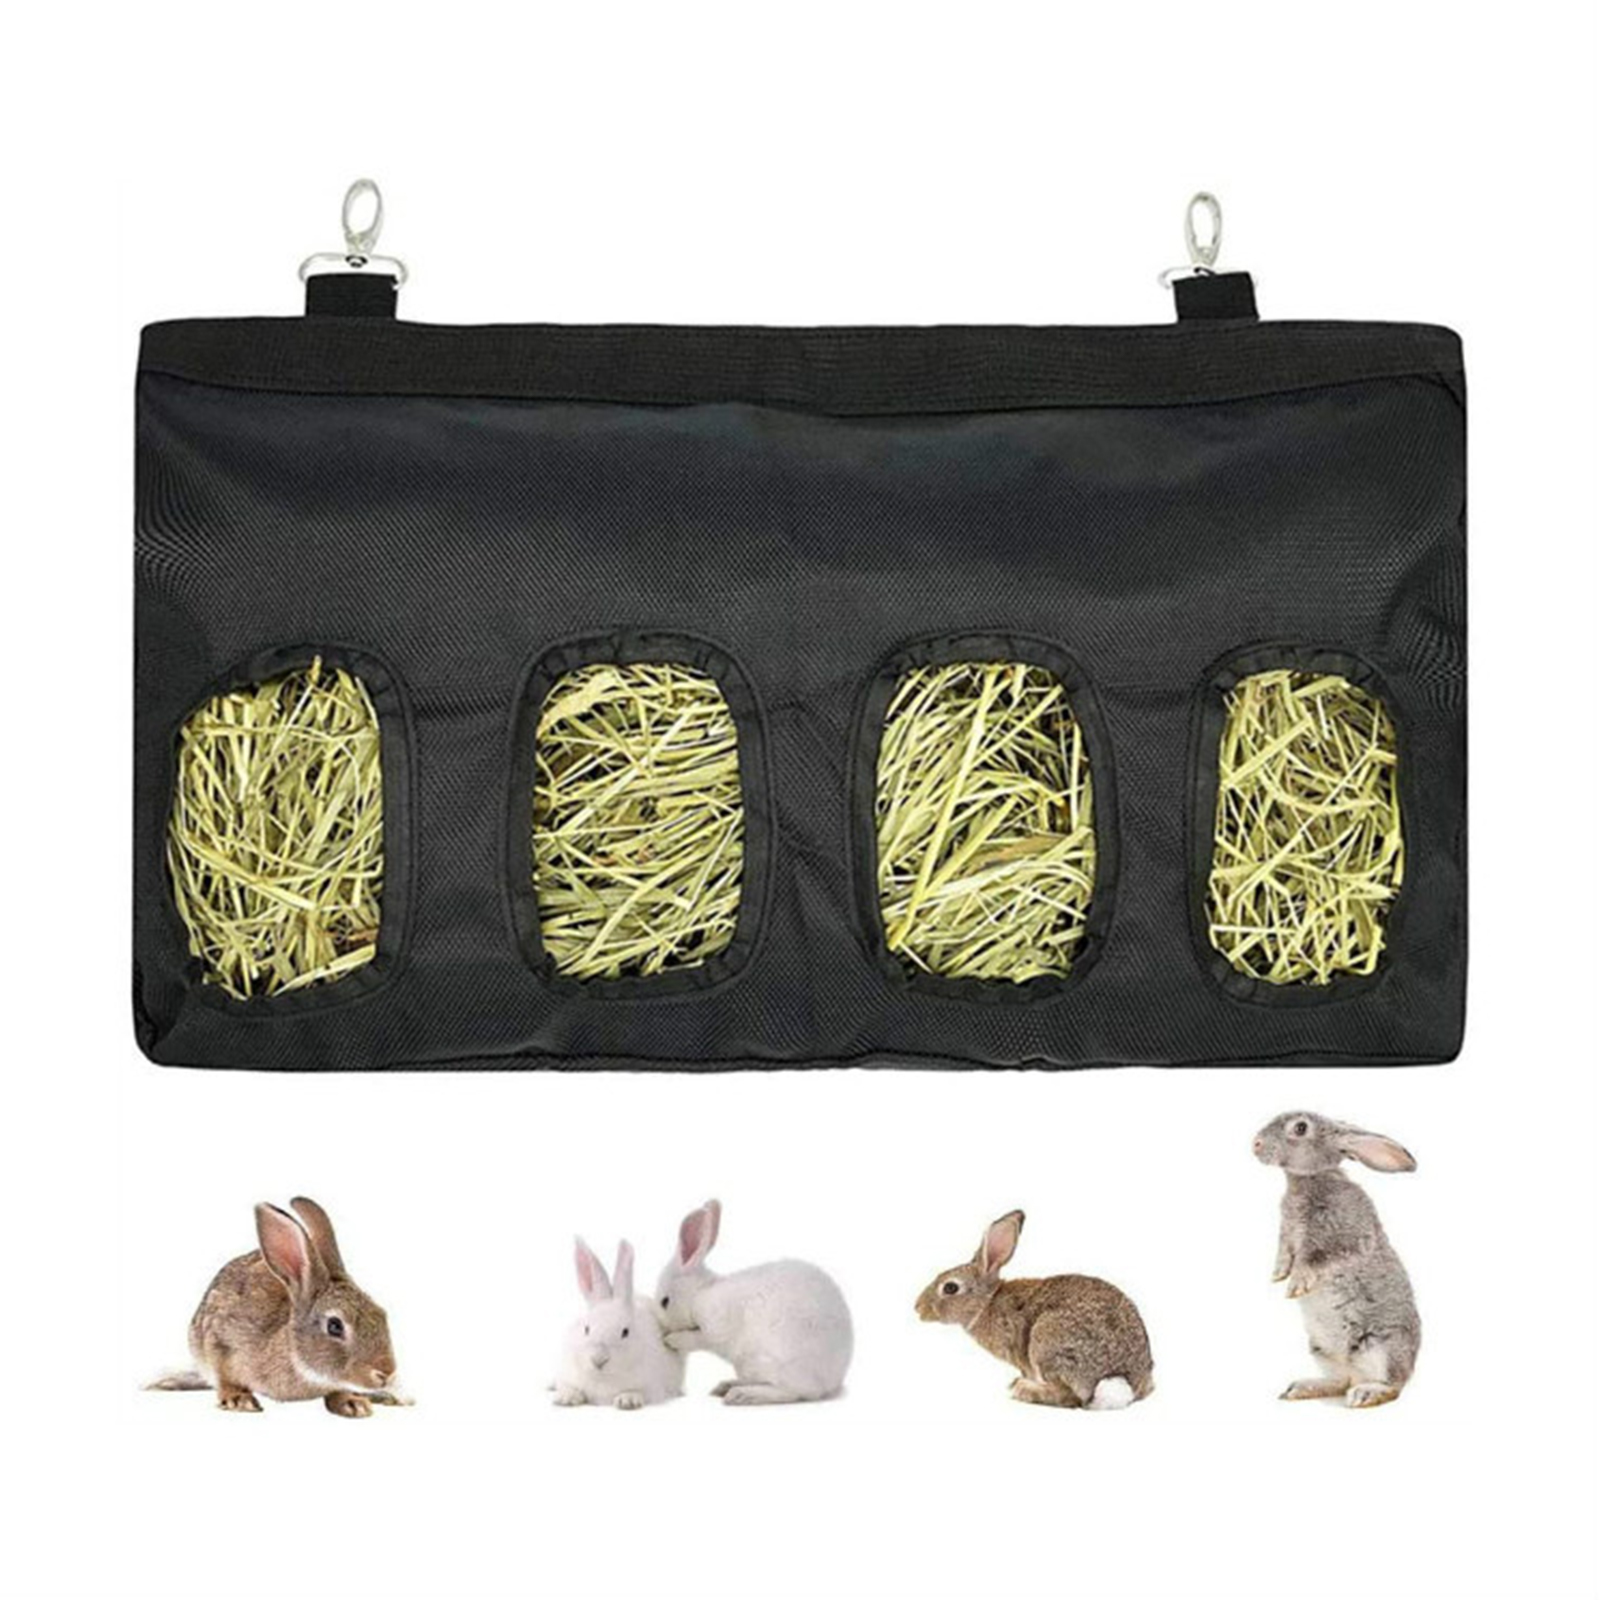 CUTU Hey Feeder Bag for Rabbit and Small Pets,1800D Oxford Cloth with Plastic Chew-Proof Windows